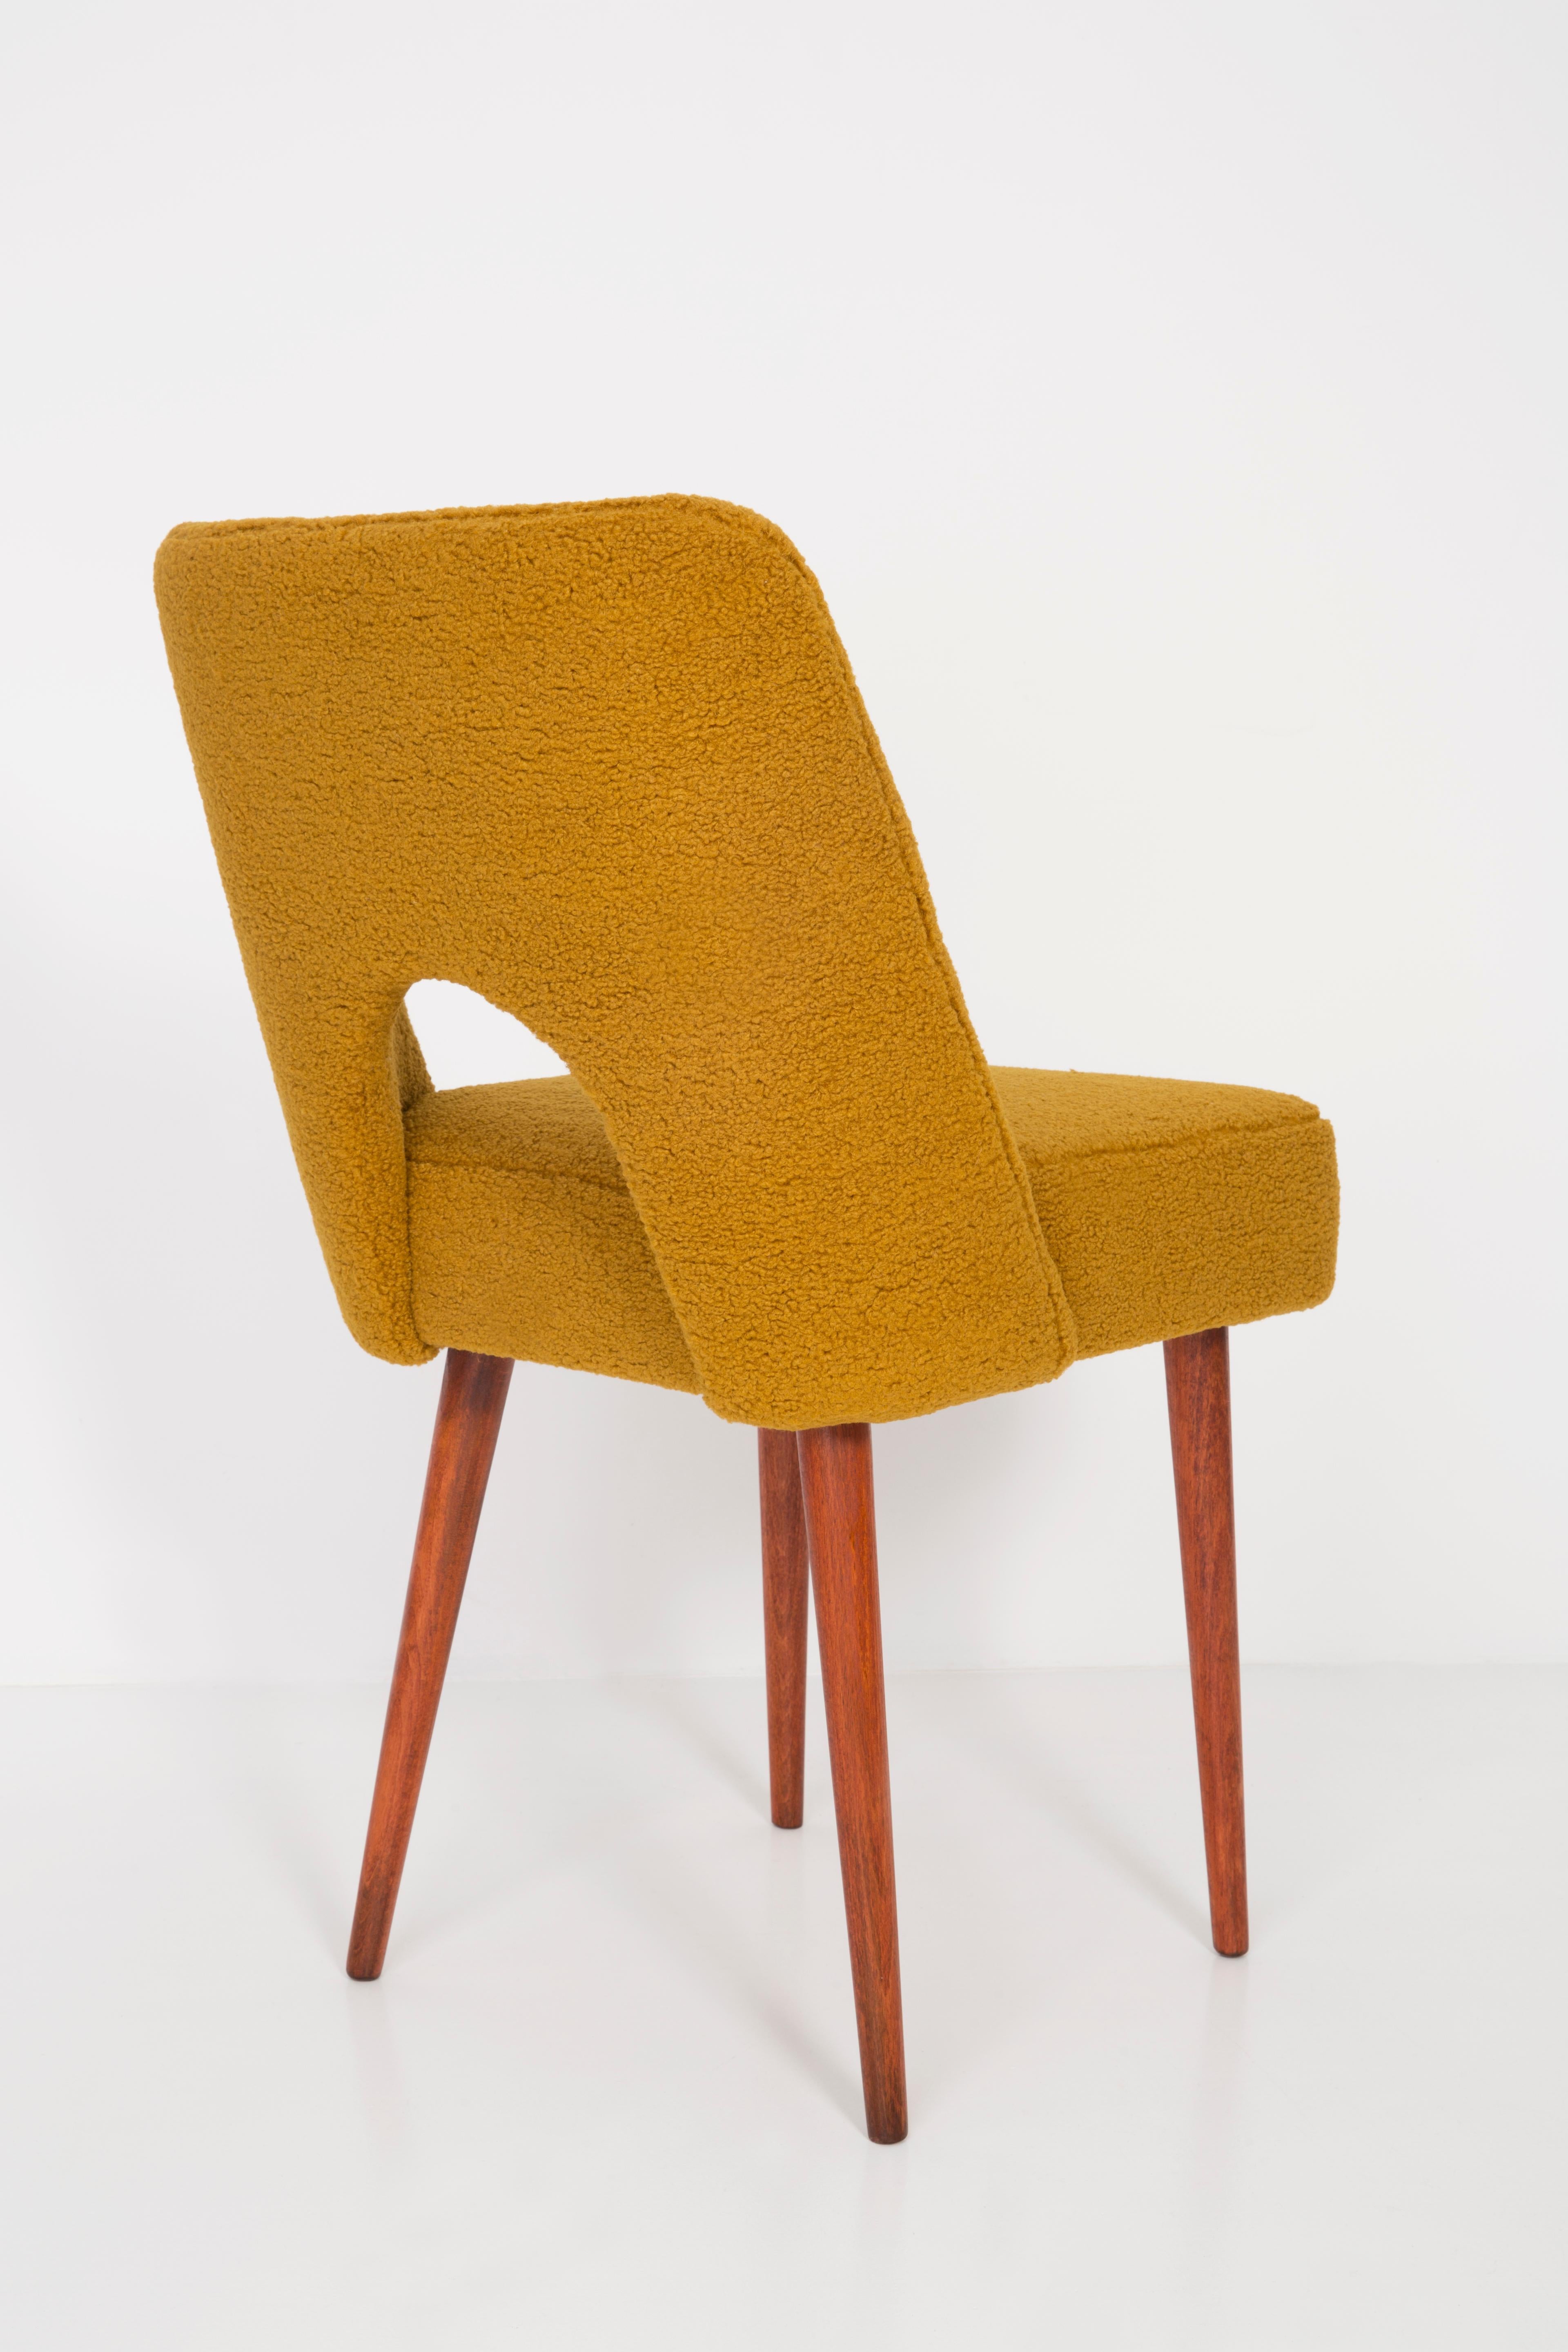 Set of Two Yellow Ochre Boucle 'Shell' Chairs, 1960s For Sale 3